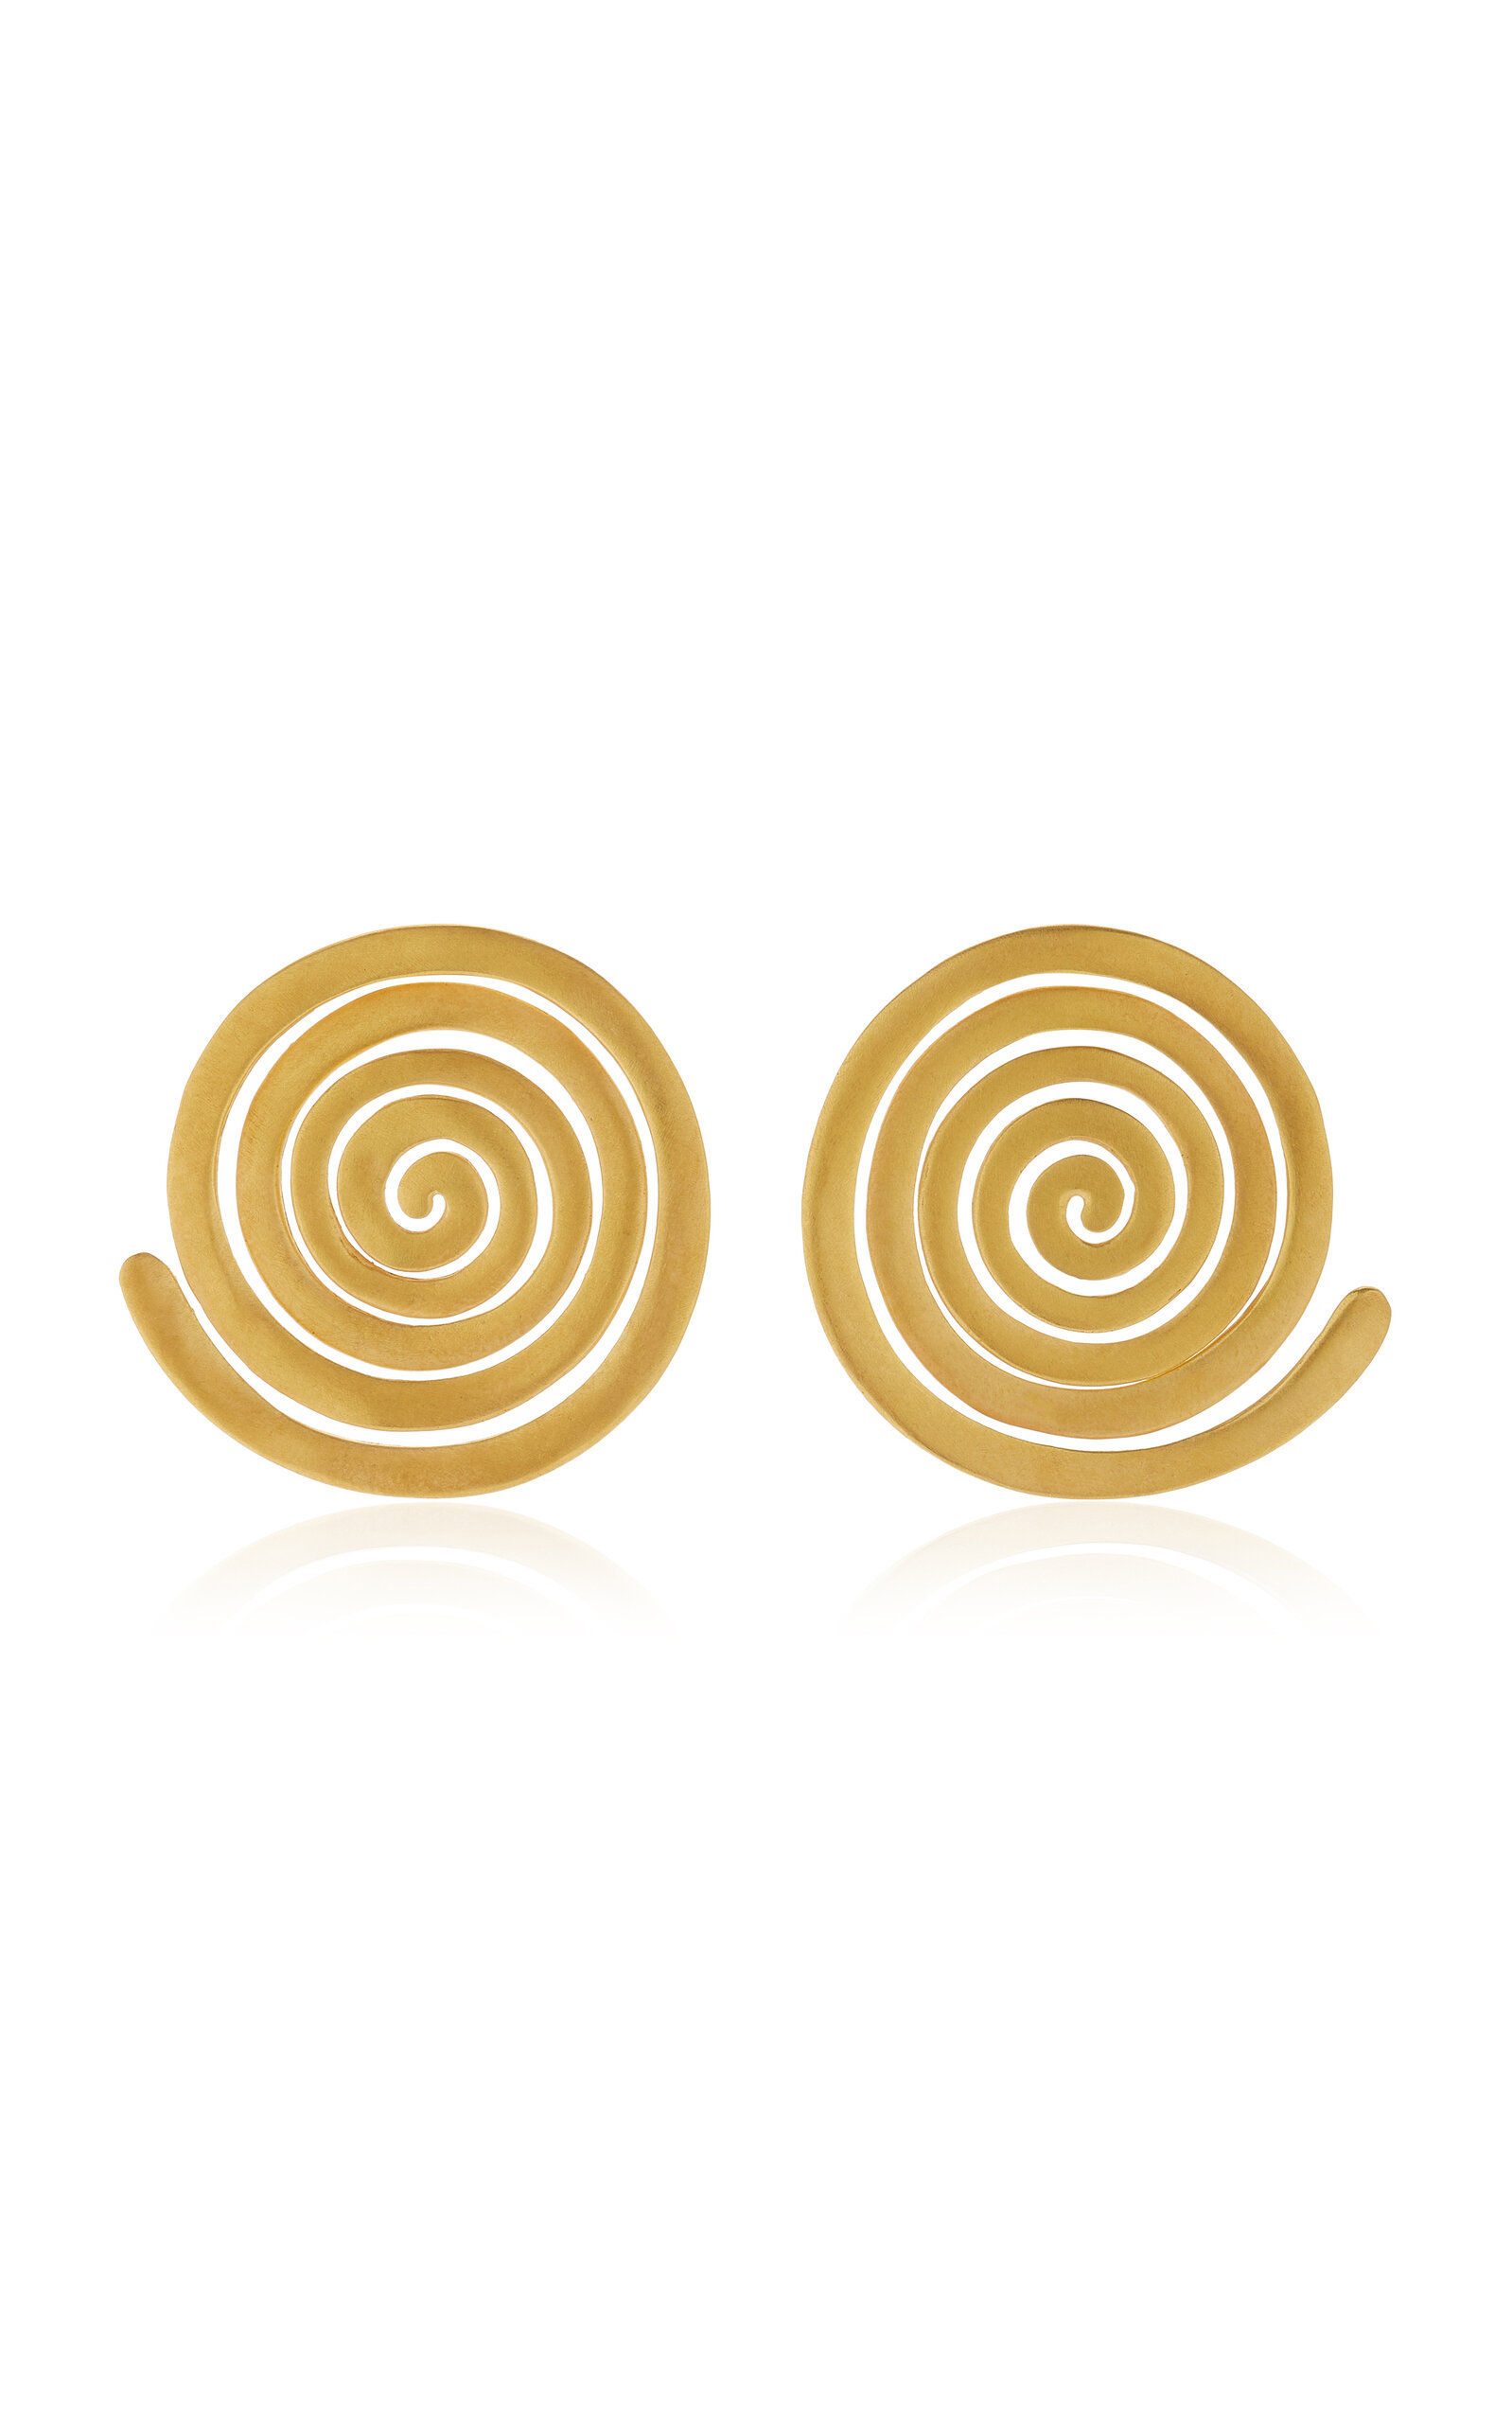 TulÃ© 24K Gold-Plated Earrings